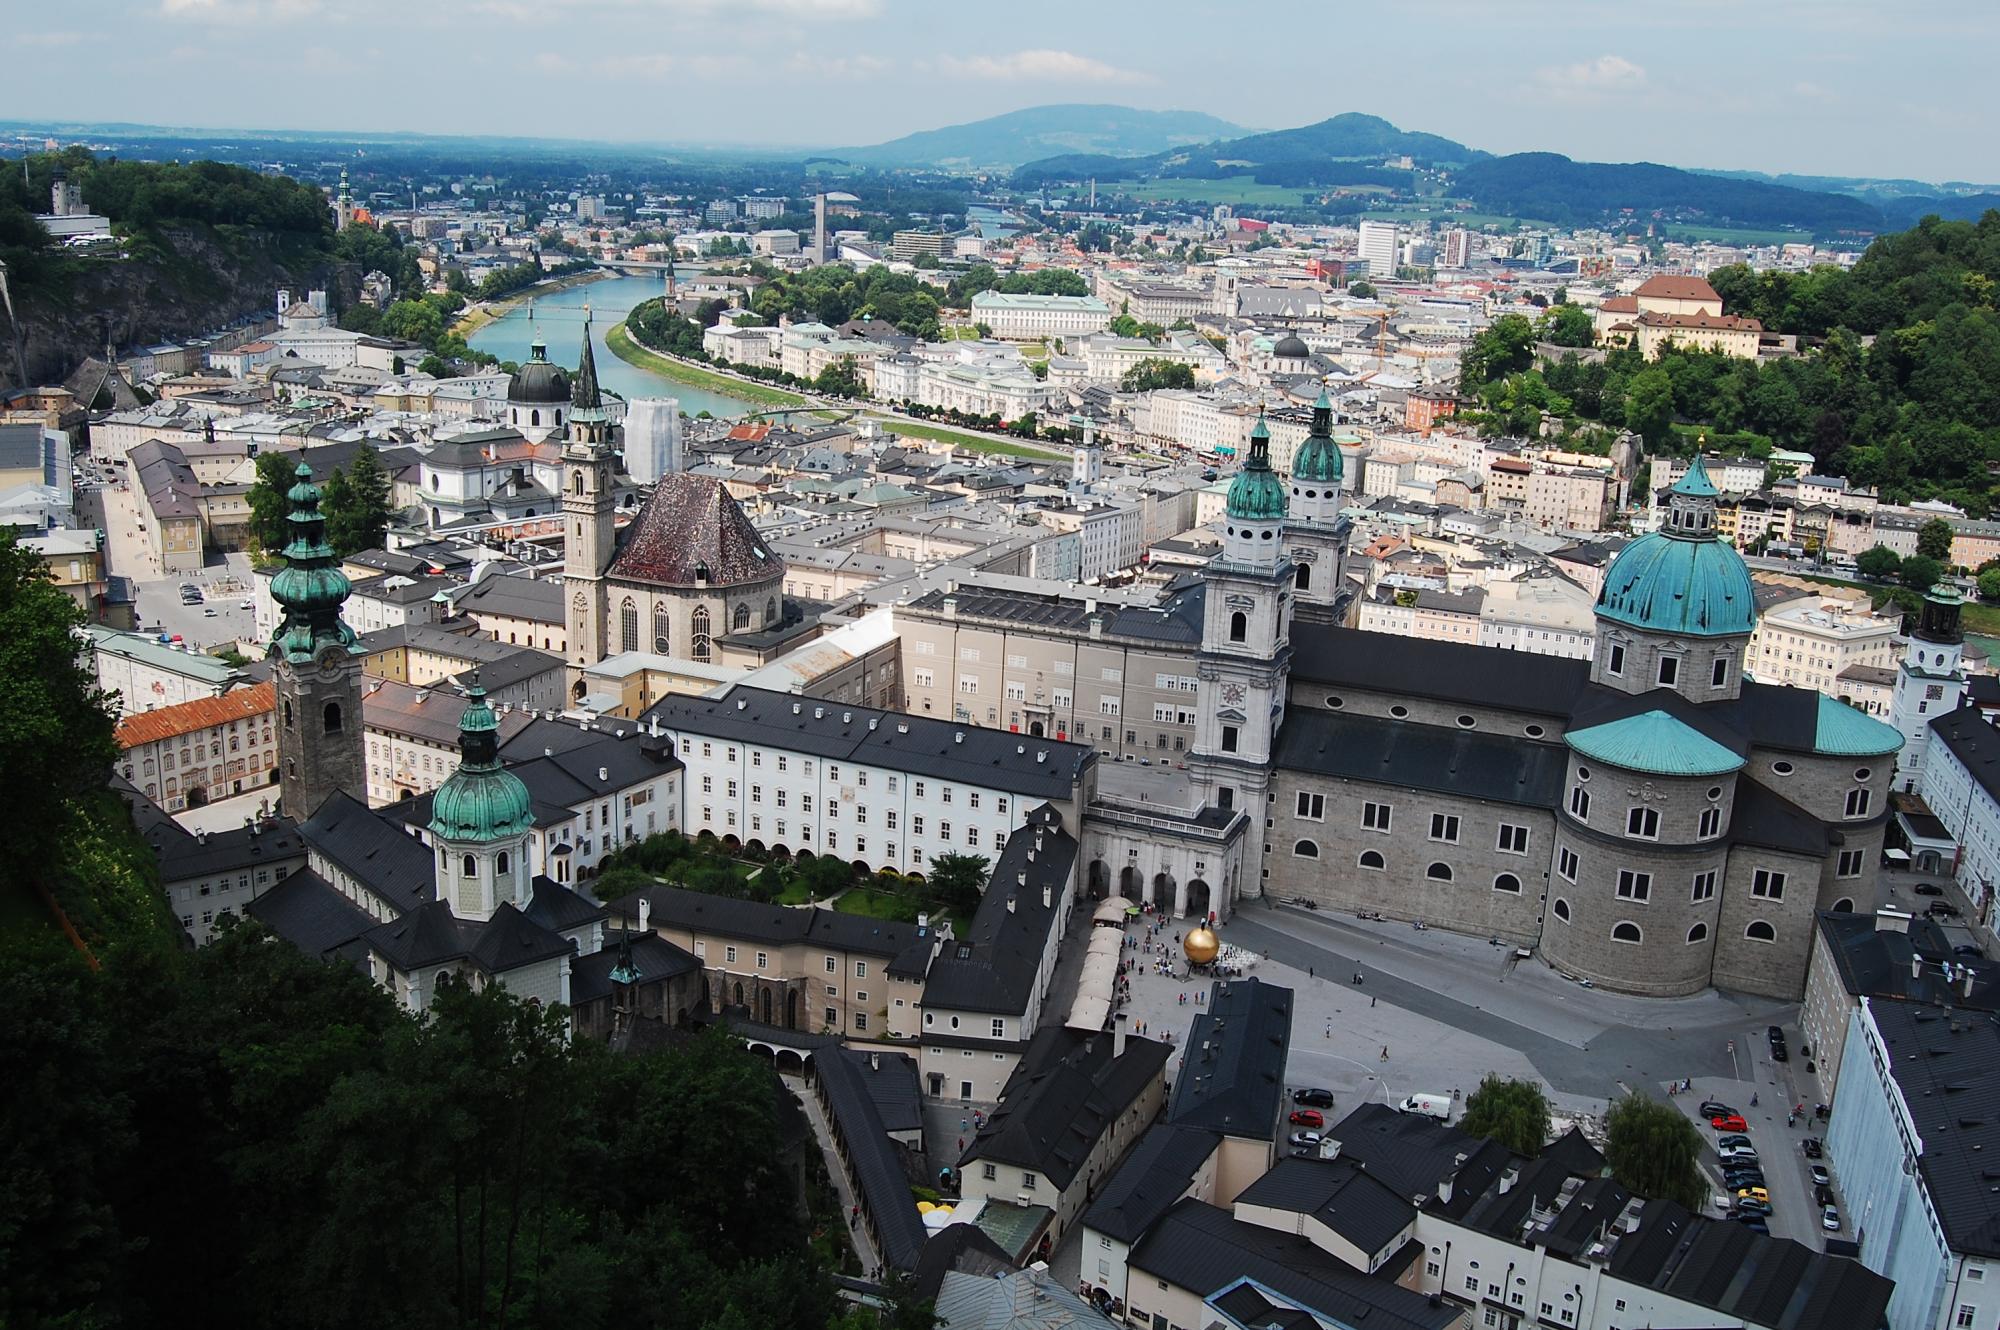 A view of the city of Salzburg in Austria from the top of a hill.